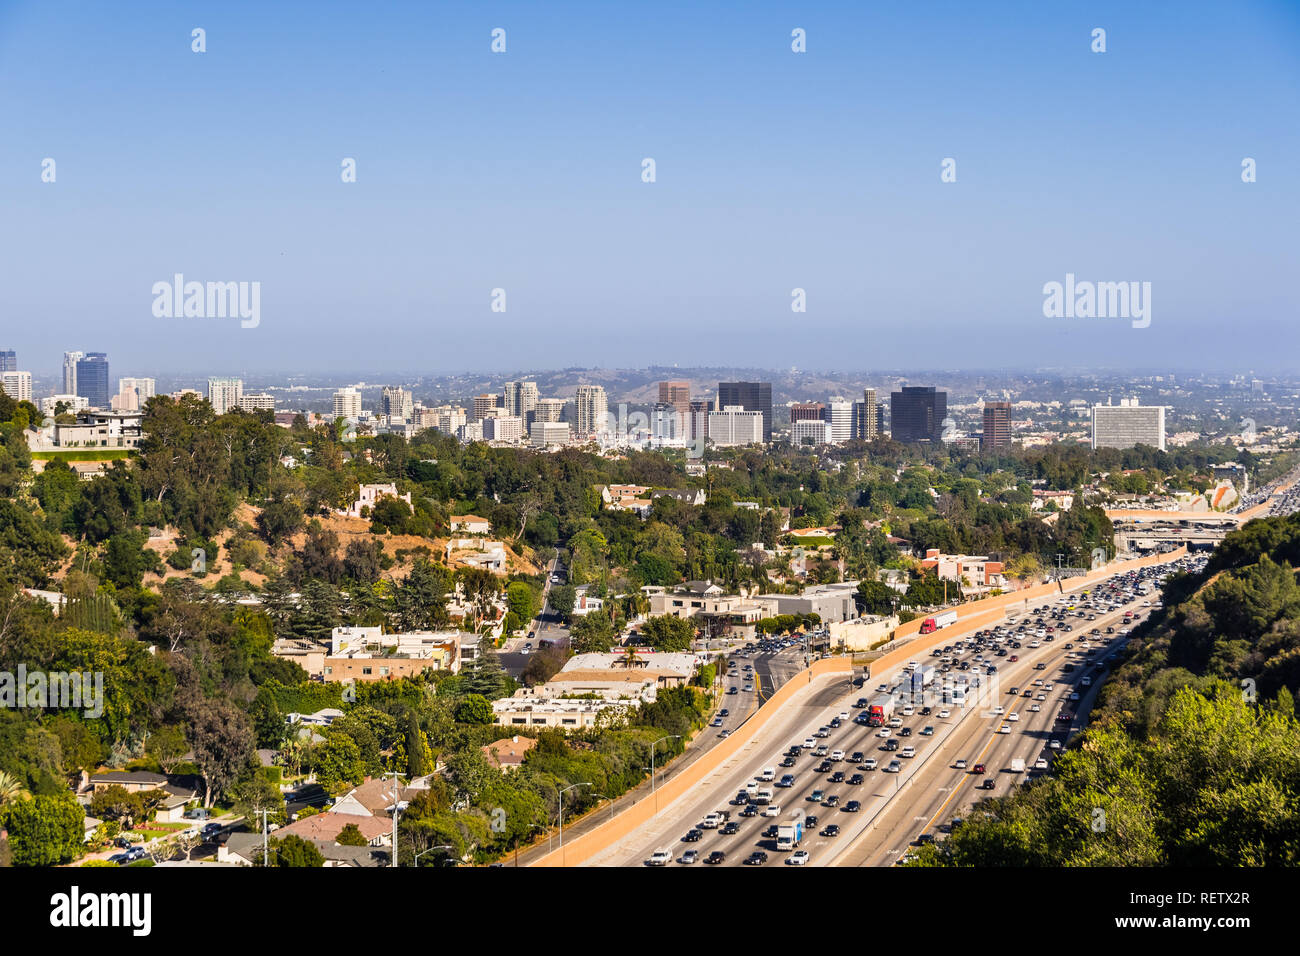 Aerial view towards the skyline of Westwood neighborhood; highway 405 with heavy traffic in the foreground; Los Angeles, California Stock Photo